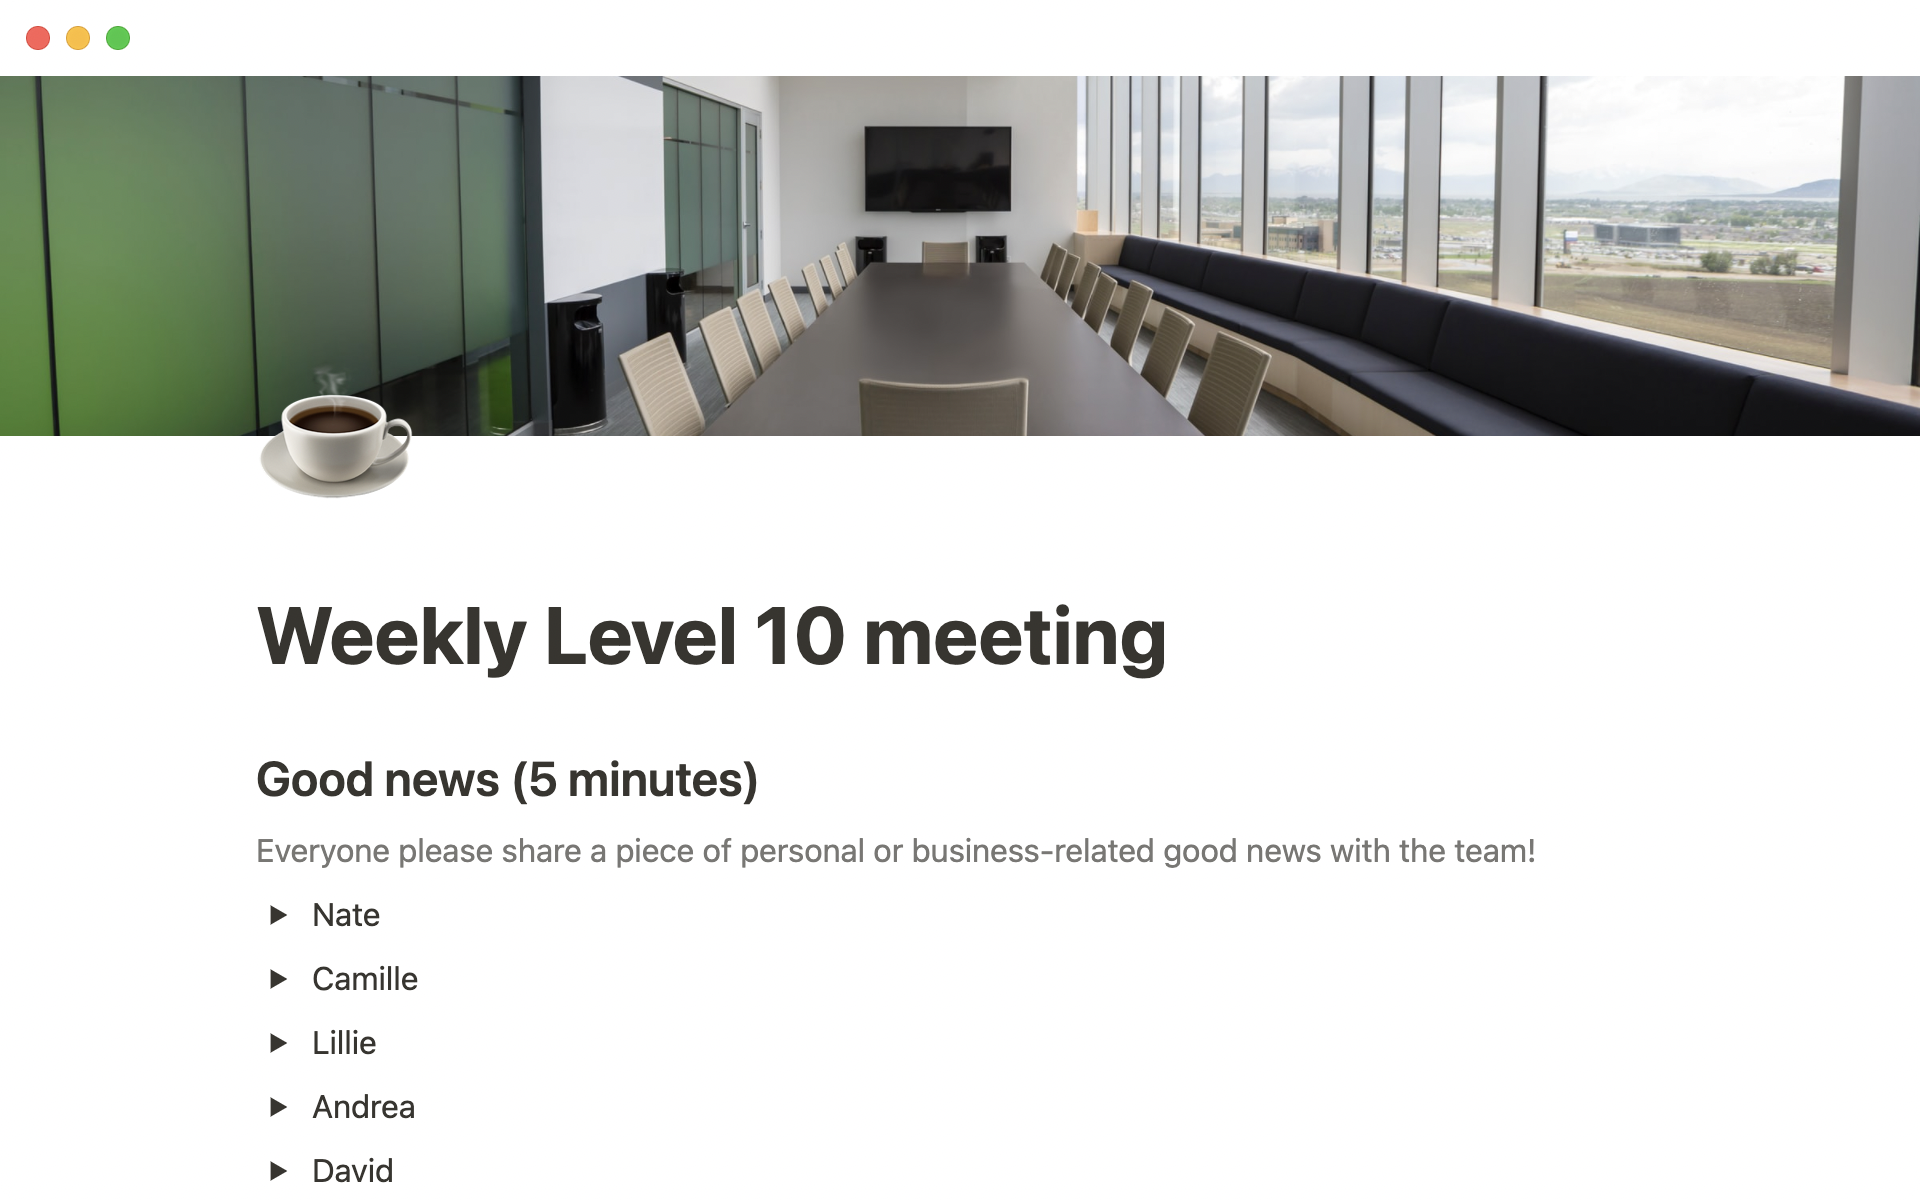 Use this weekly level 10 meeting template to stay on top of company goals and solve high priority problems in a timely manner.